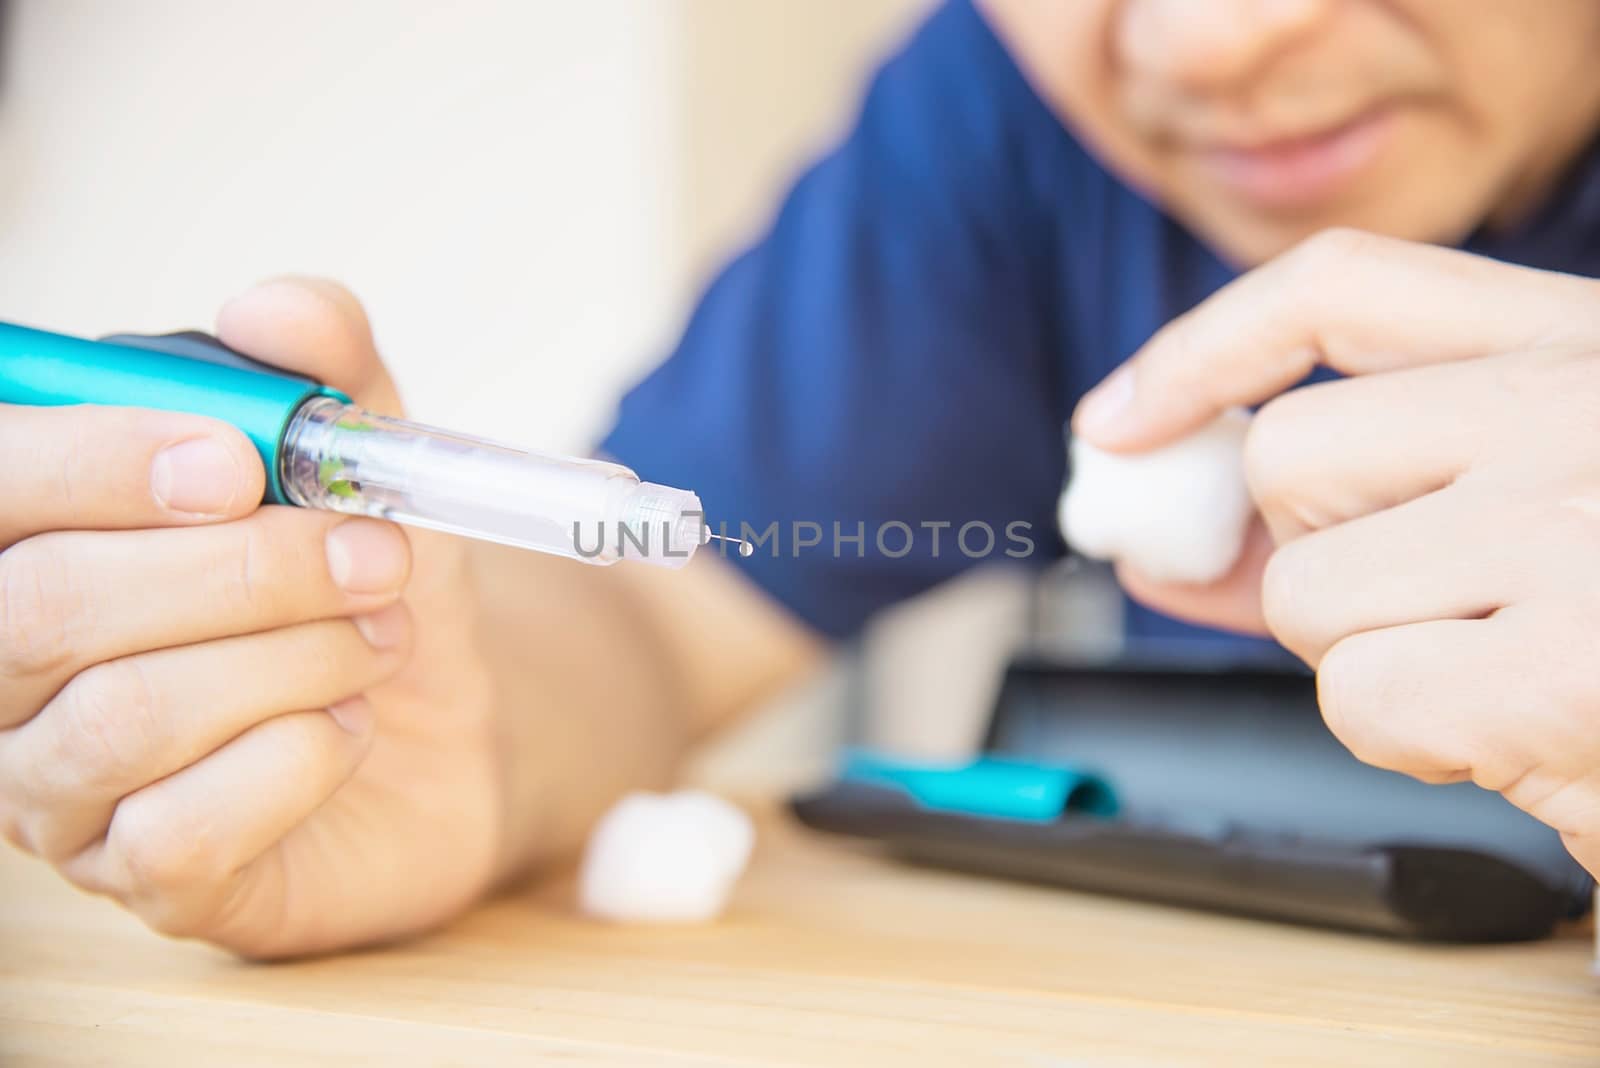 Man preparing insulin diabetic syringe for injection by pairhandmade